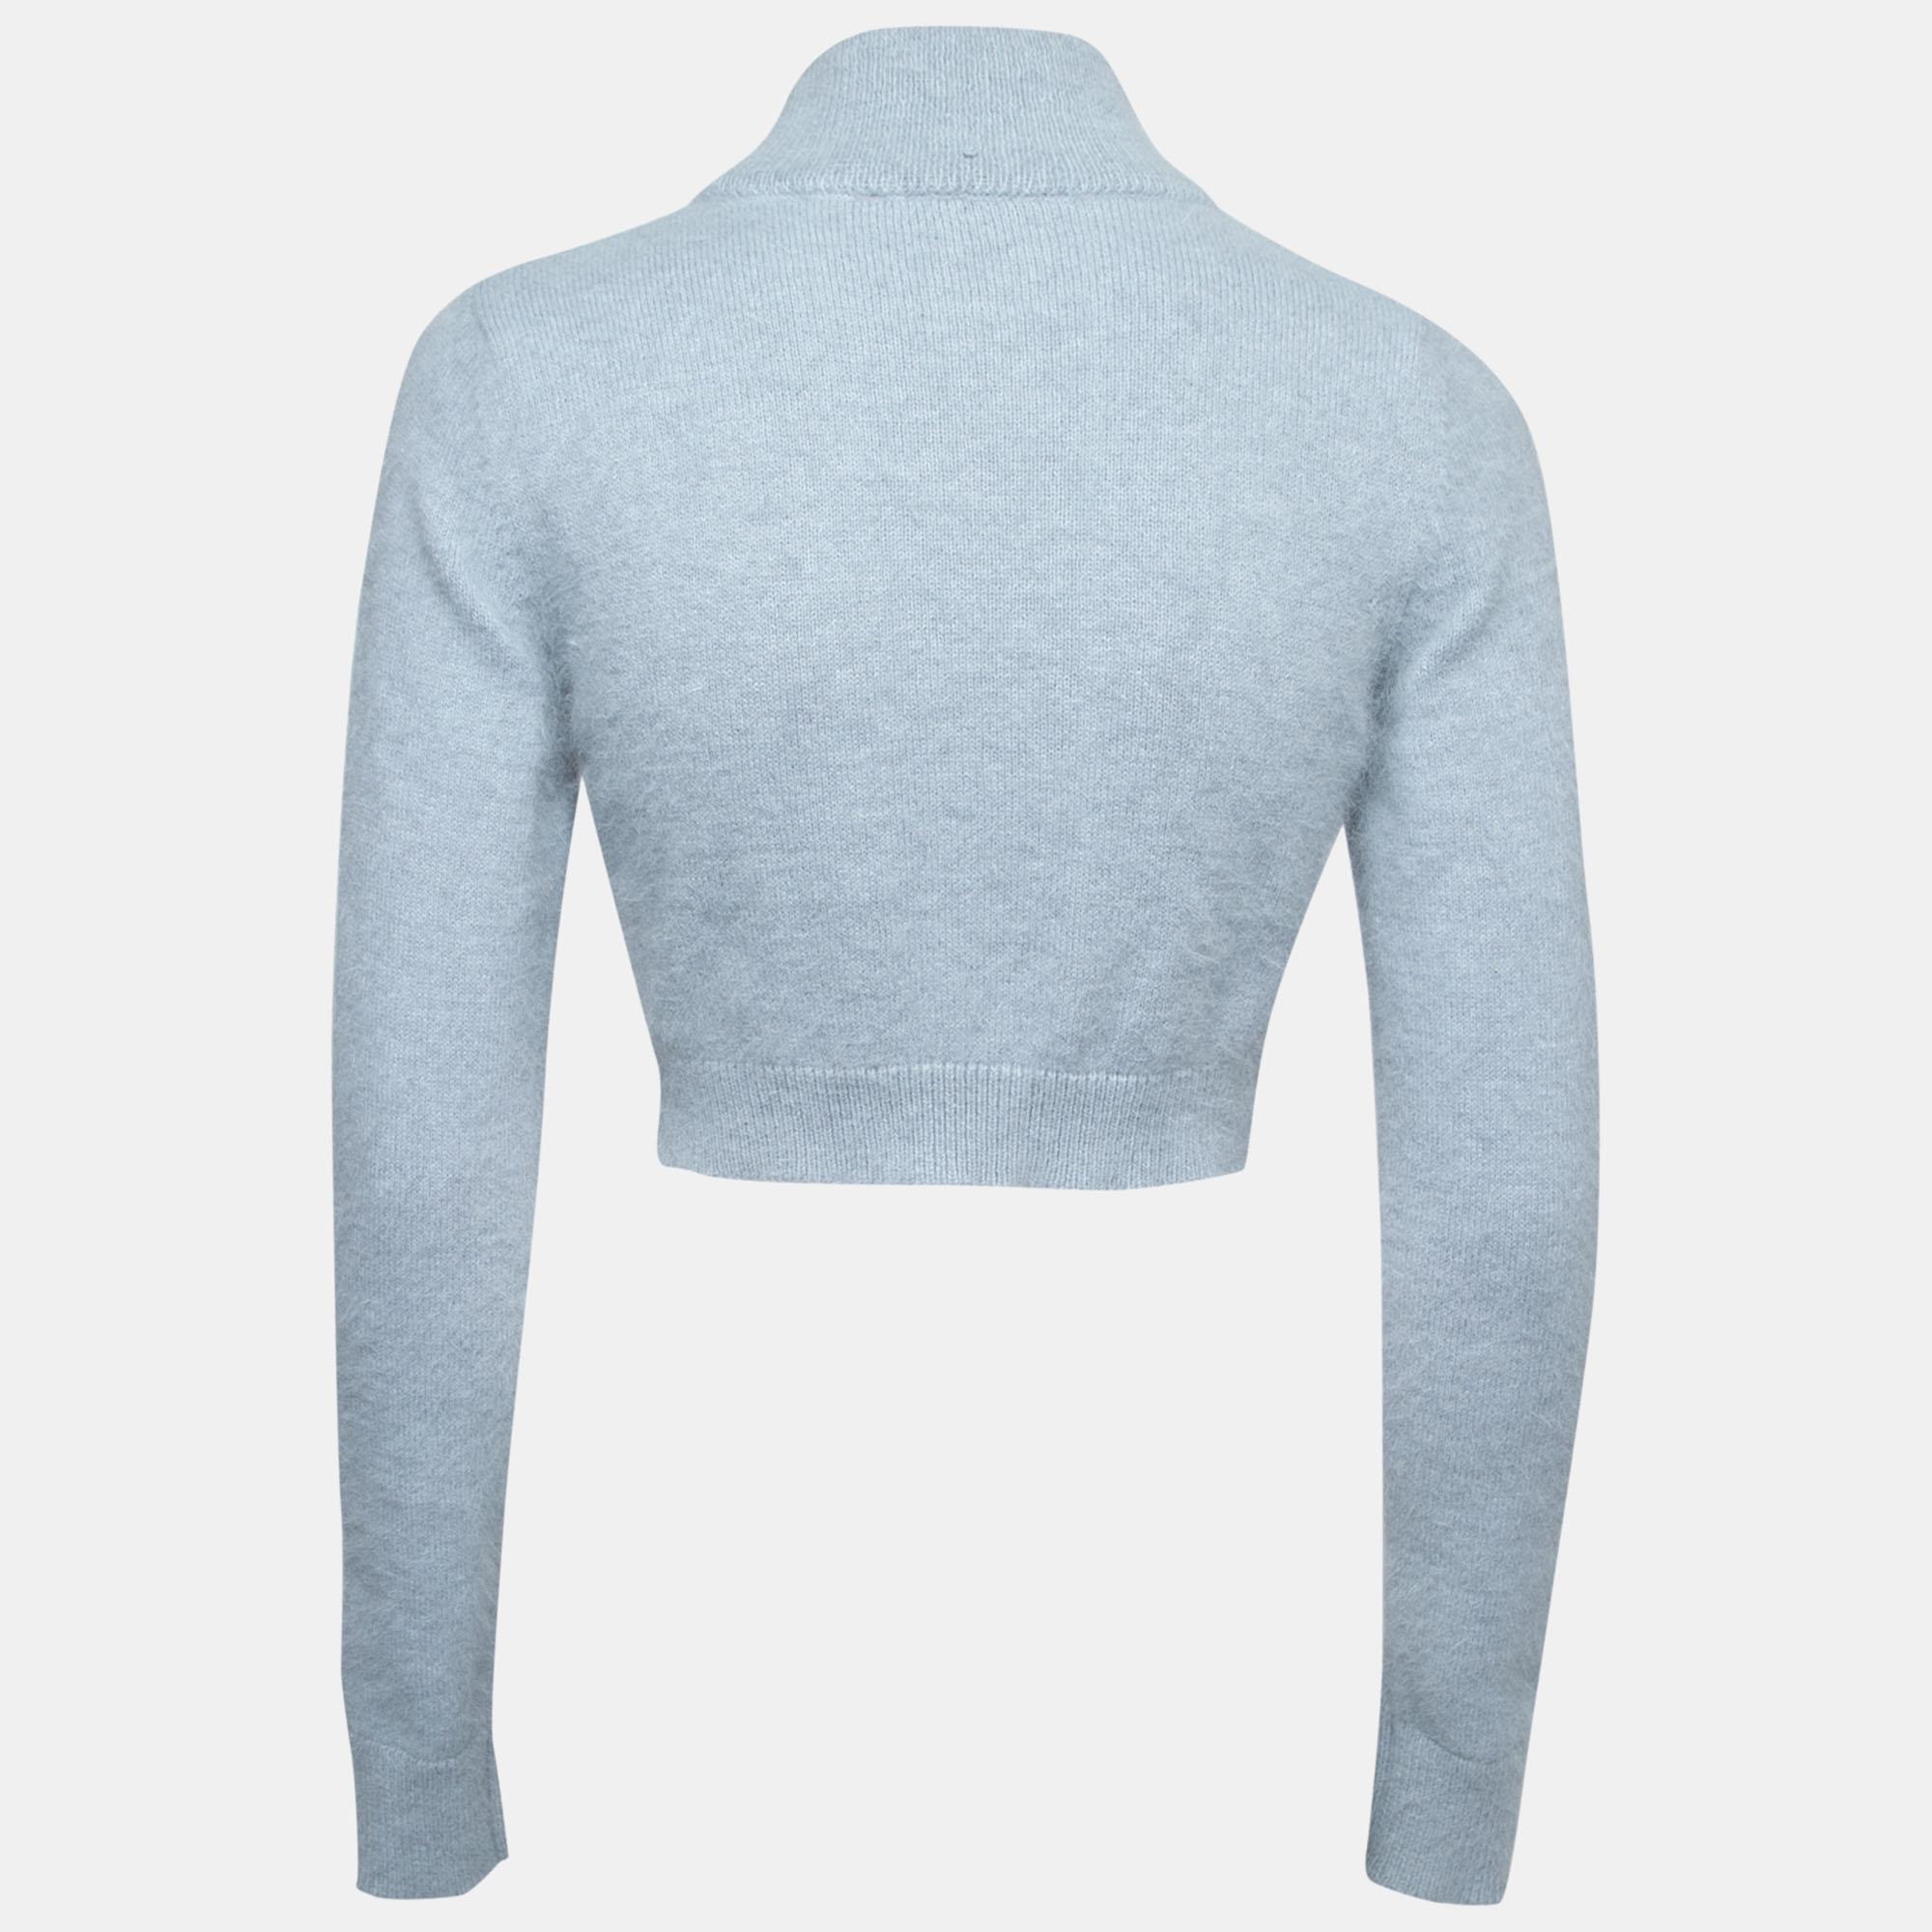 Stay warm and stylish at the same time in this fabulous sweater from Balmain. This blue sweater is made of a wool blend and features a cropped design. It flaunts a high neck and long sleeves. Pair it with denims and smart ankle boots for making a